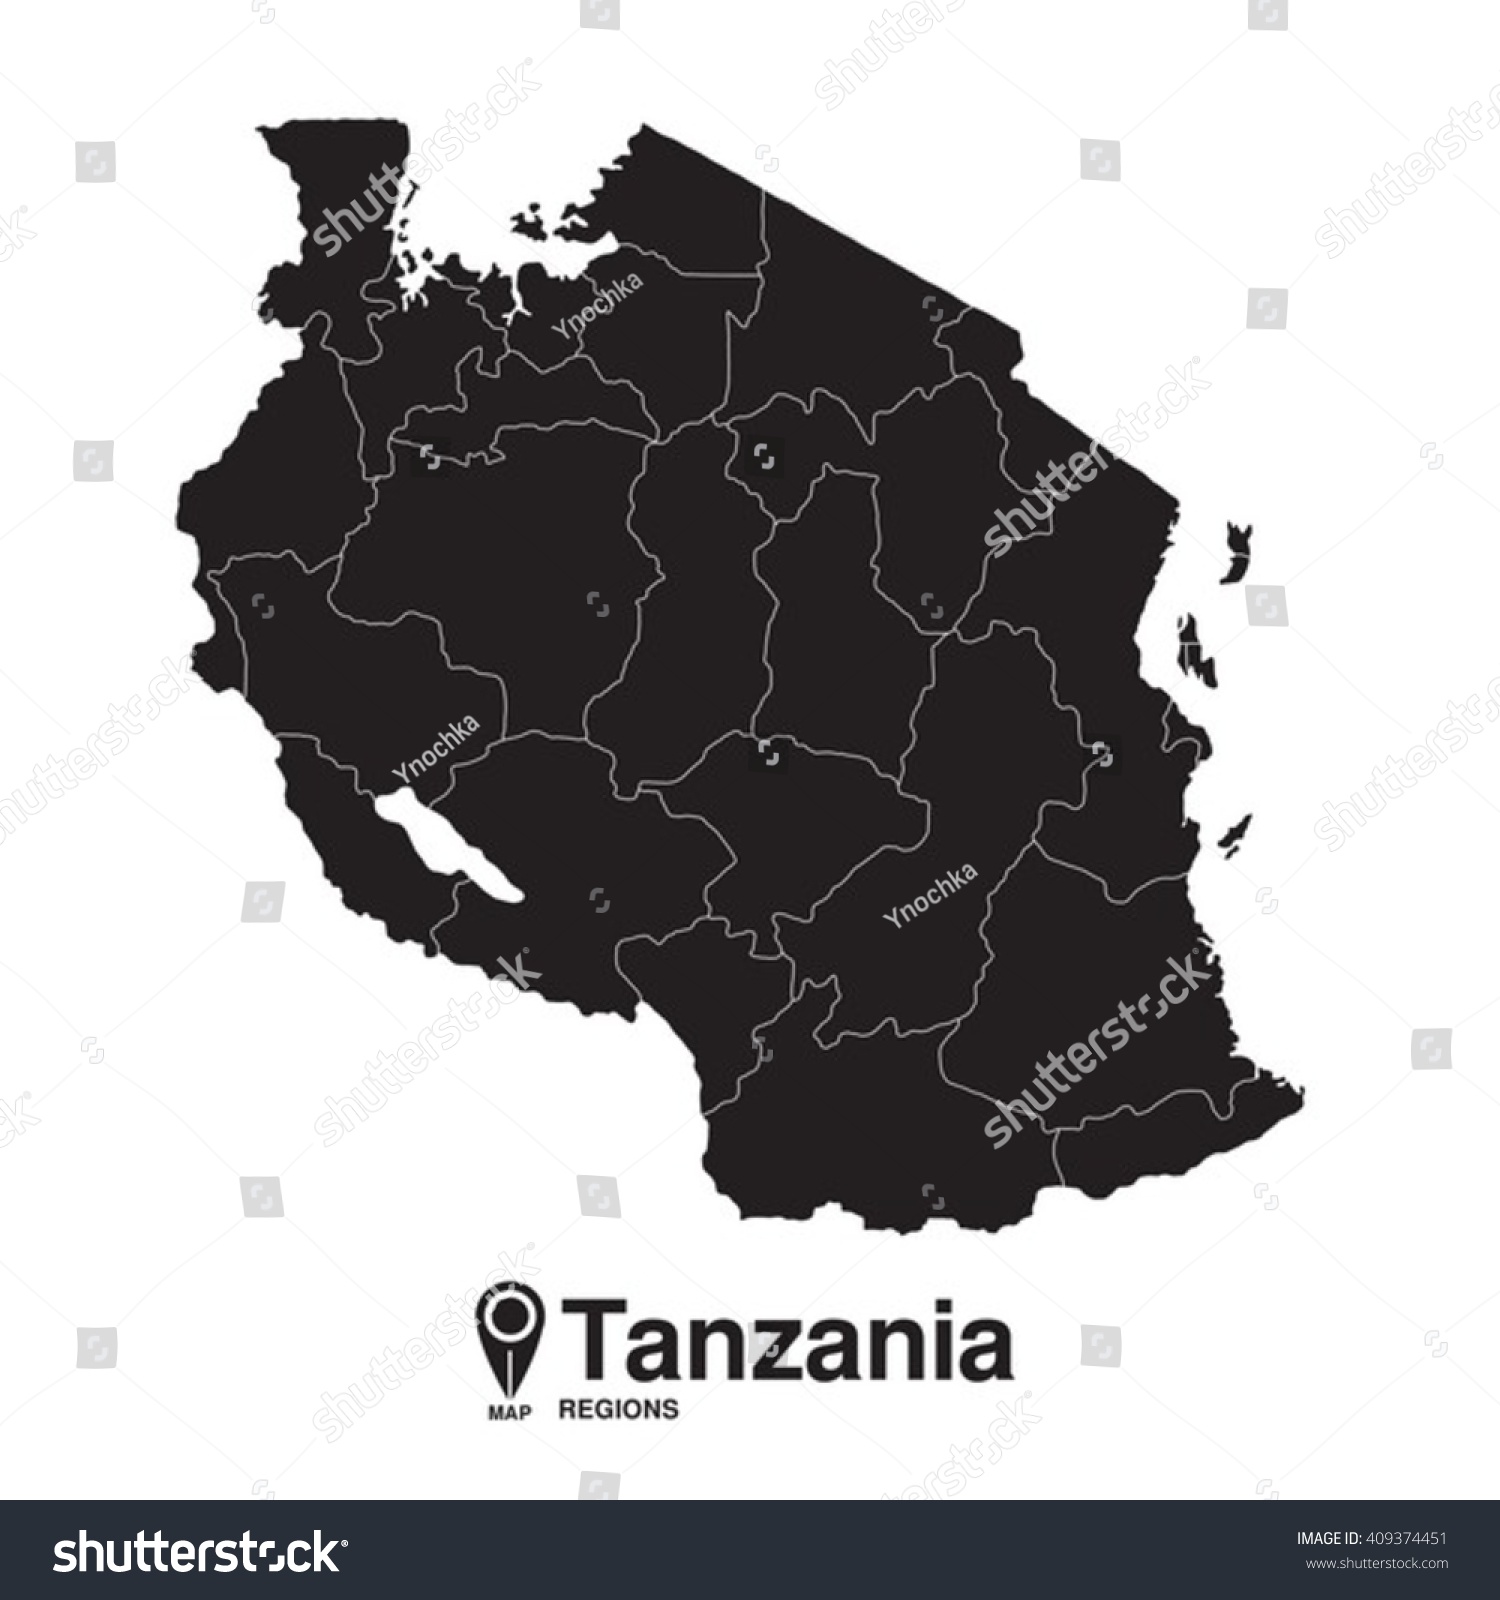 Tanzania Map Regions Contour Silhouette Stock Vector Royalty Free 409374451 